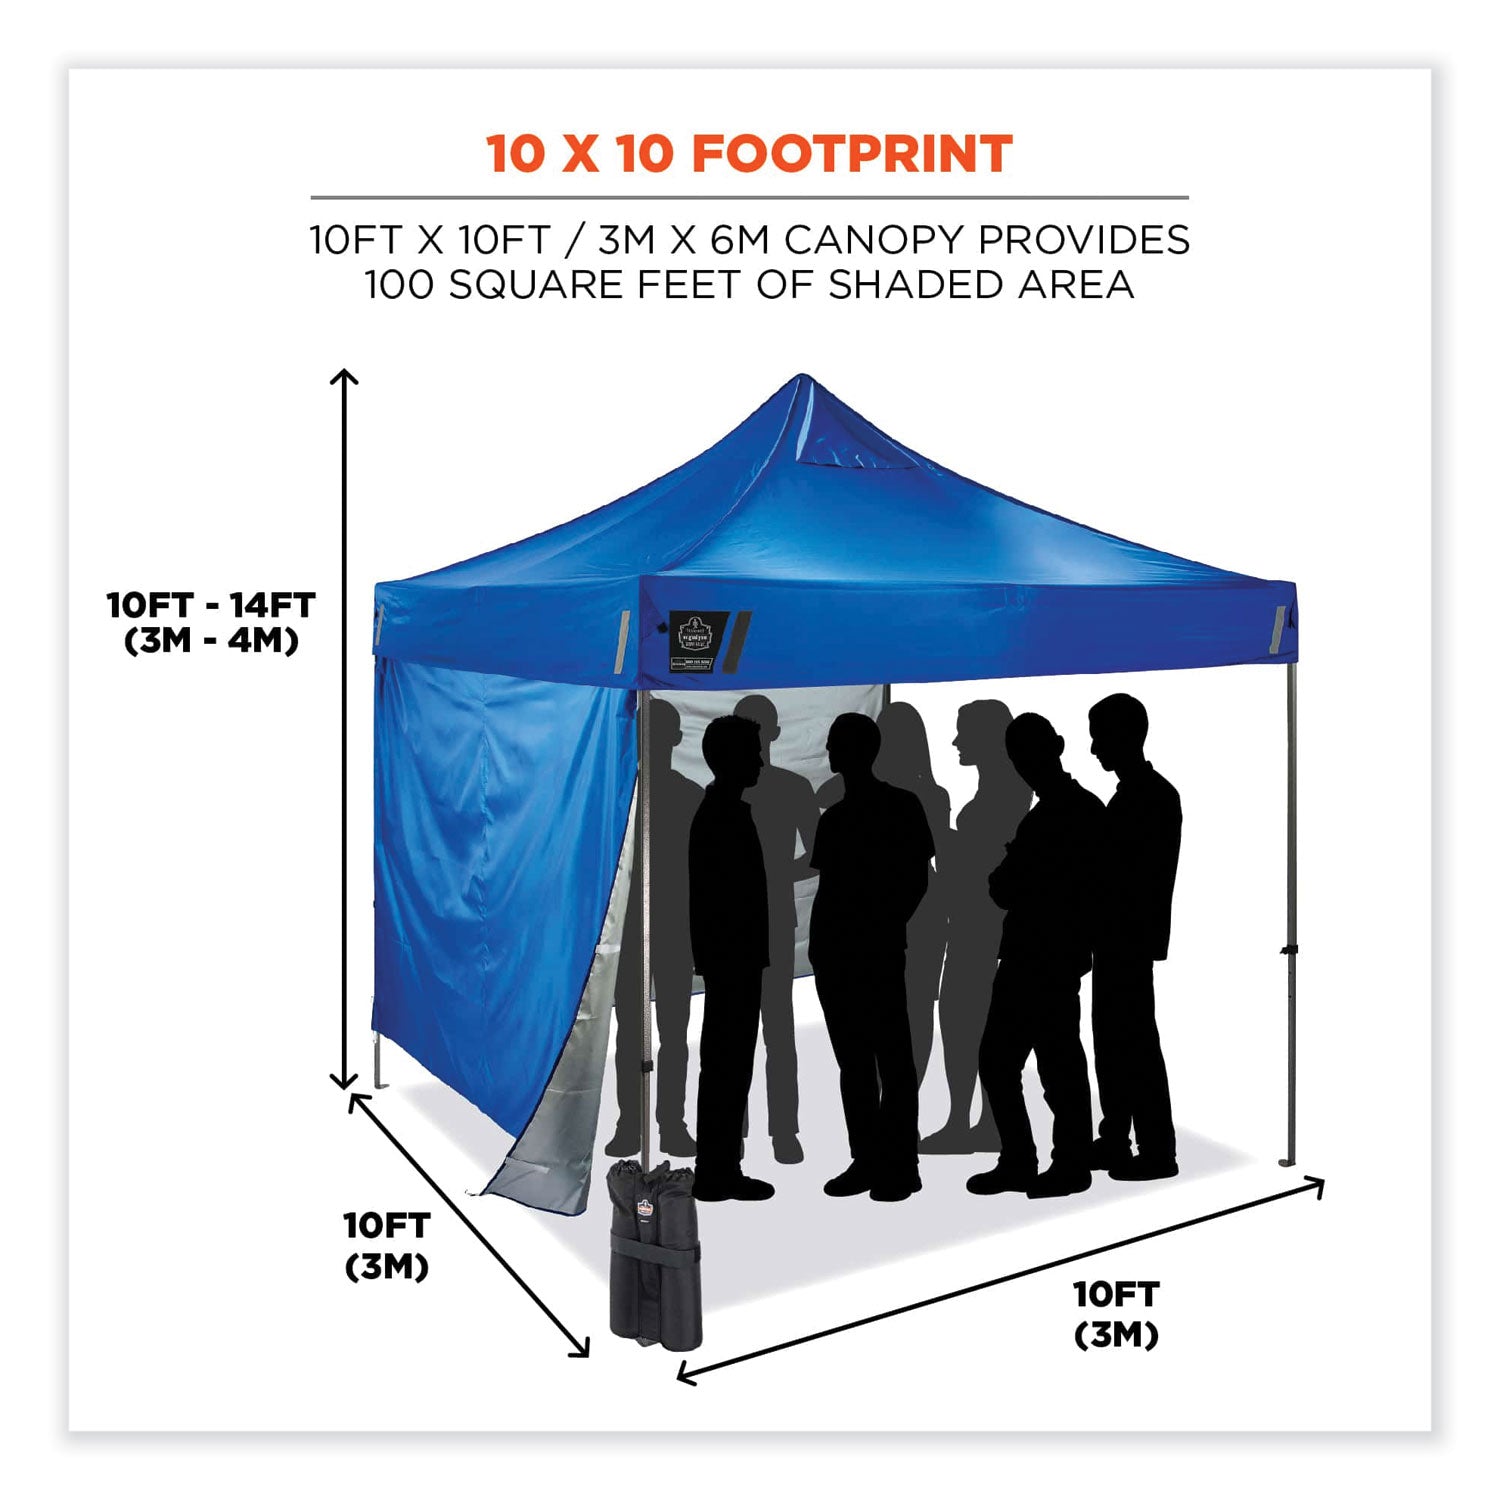 shax-6051-heavy-duty-pop-up-tent-kit-single-skin-10-ft-x-10-ft-polyester-steel-blue-ships-in-1-3-business-days_ego12952 - 2